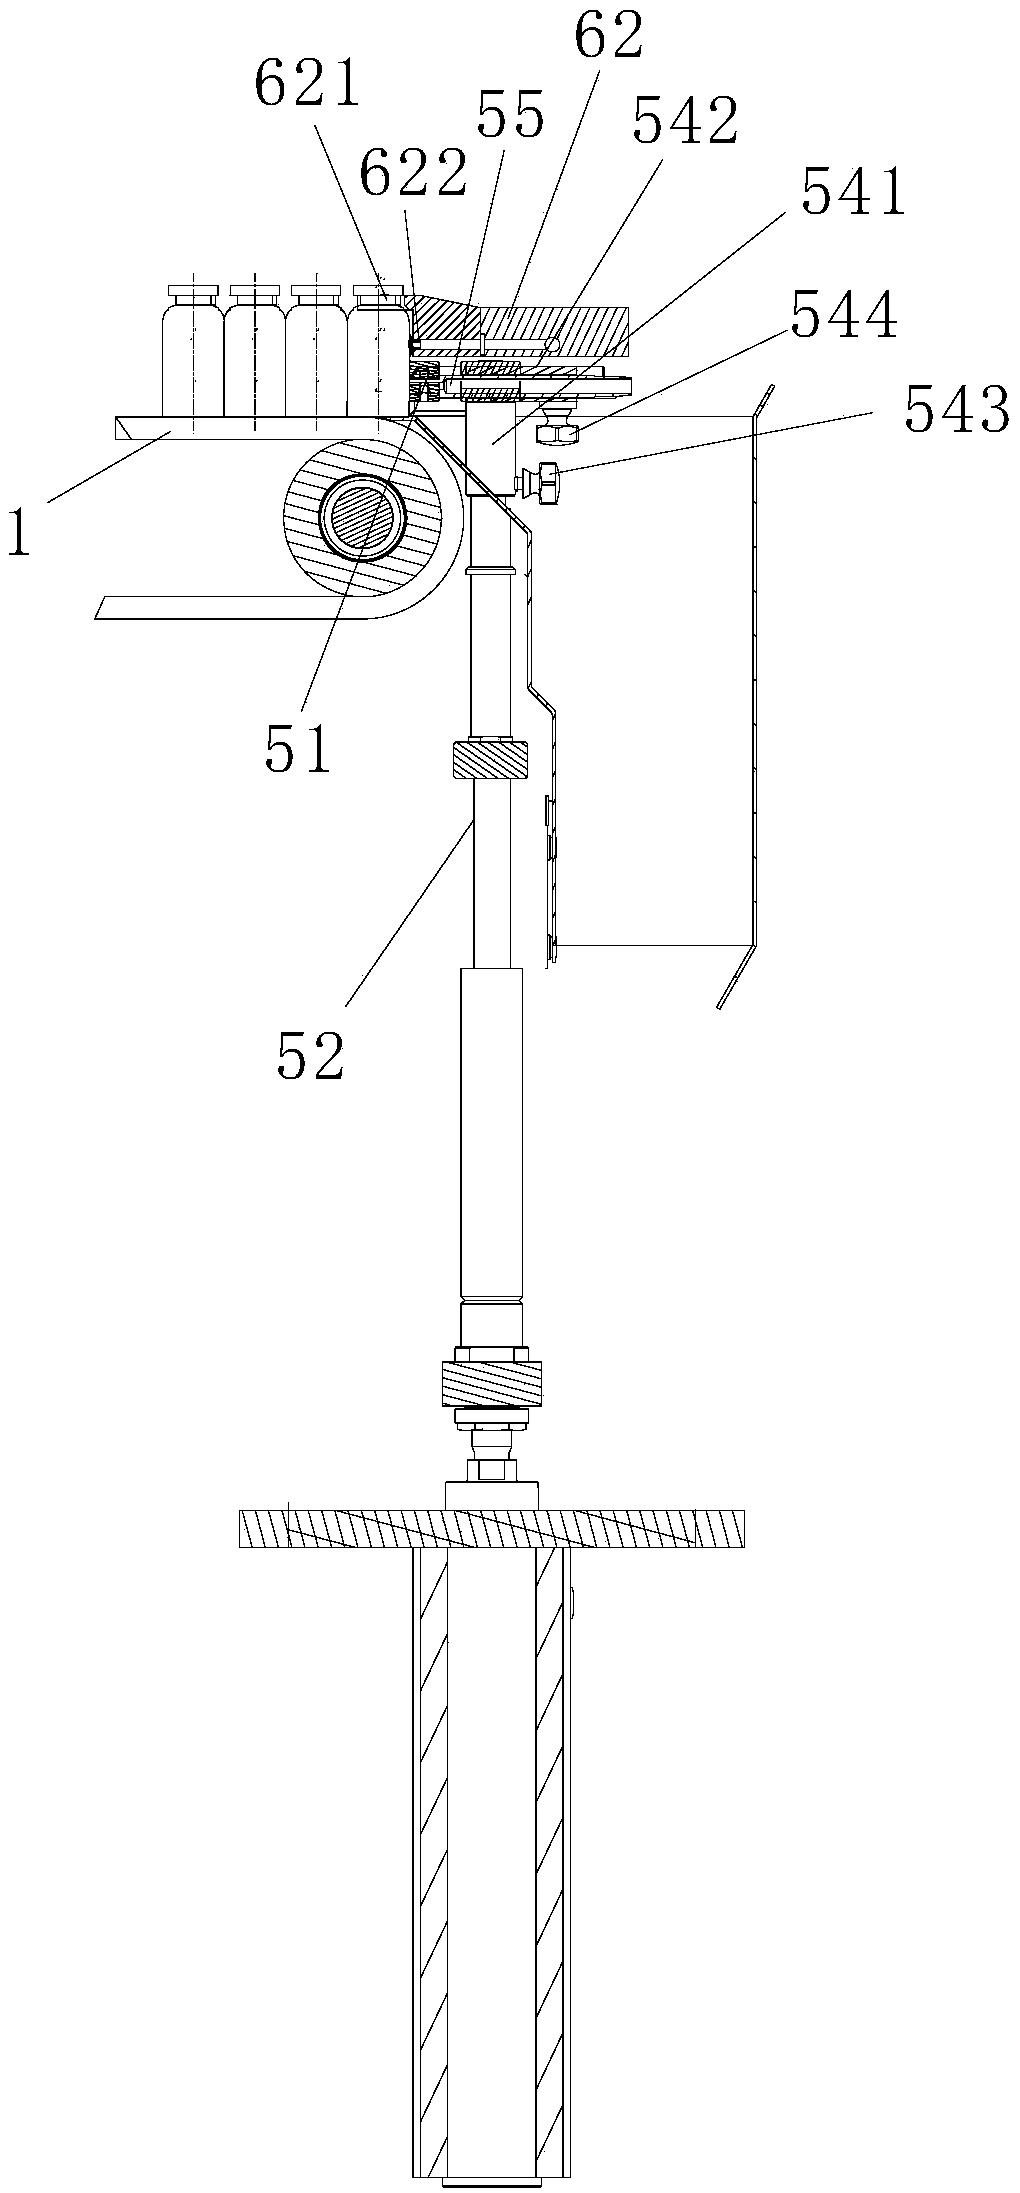 Bottle body transferring device and method